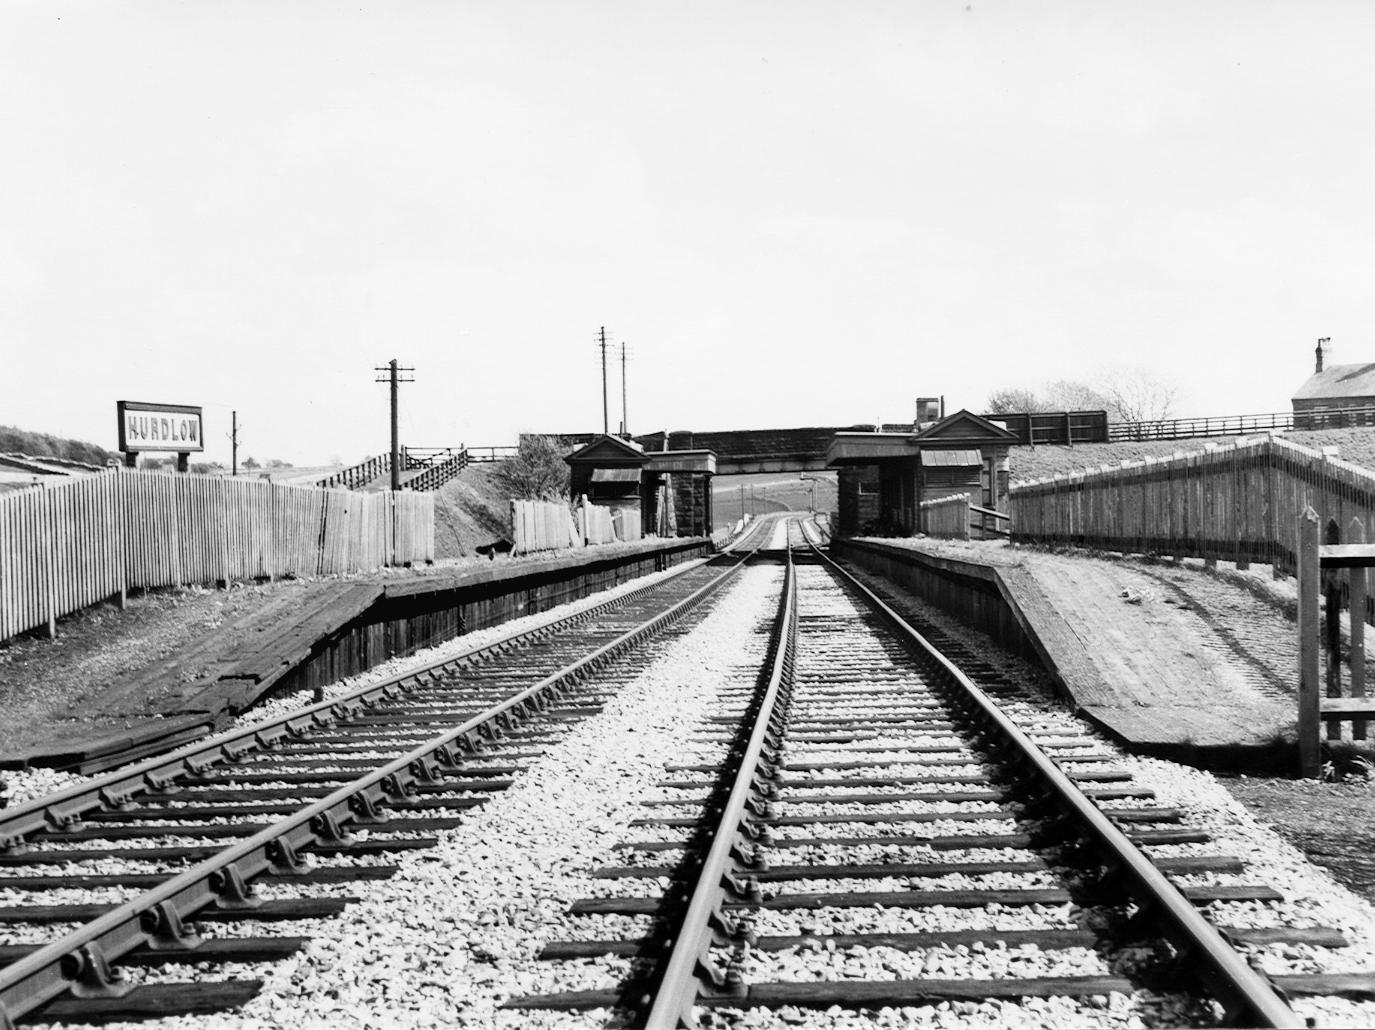 Hurdlow station, which closed in 1949